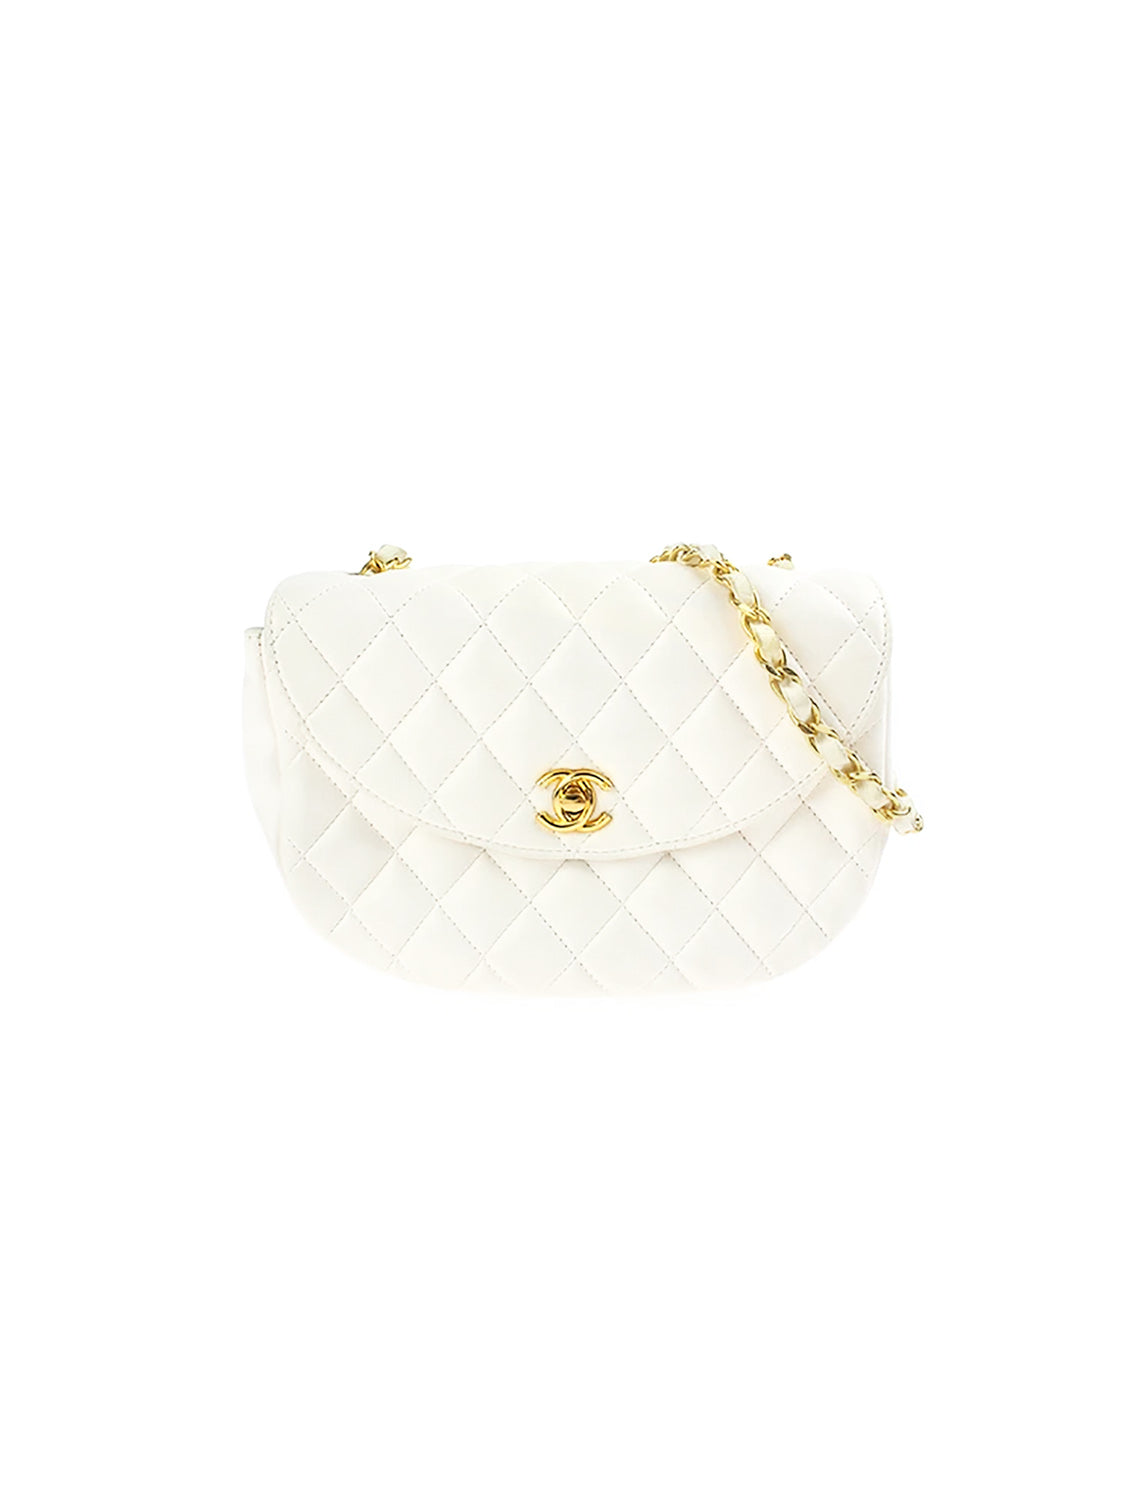 Chanel Rounded White Flap Bag